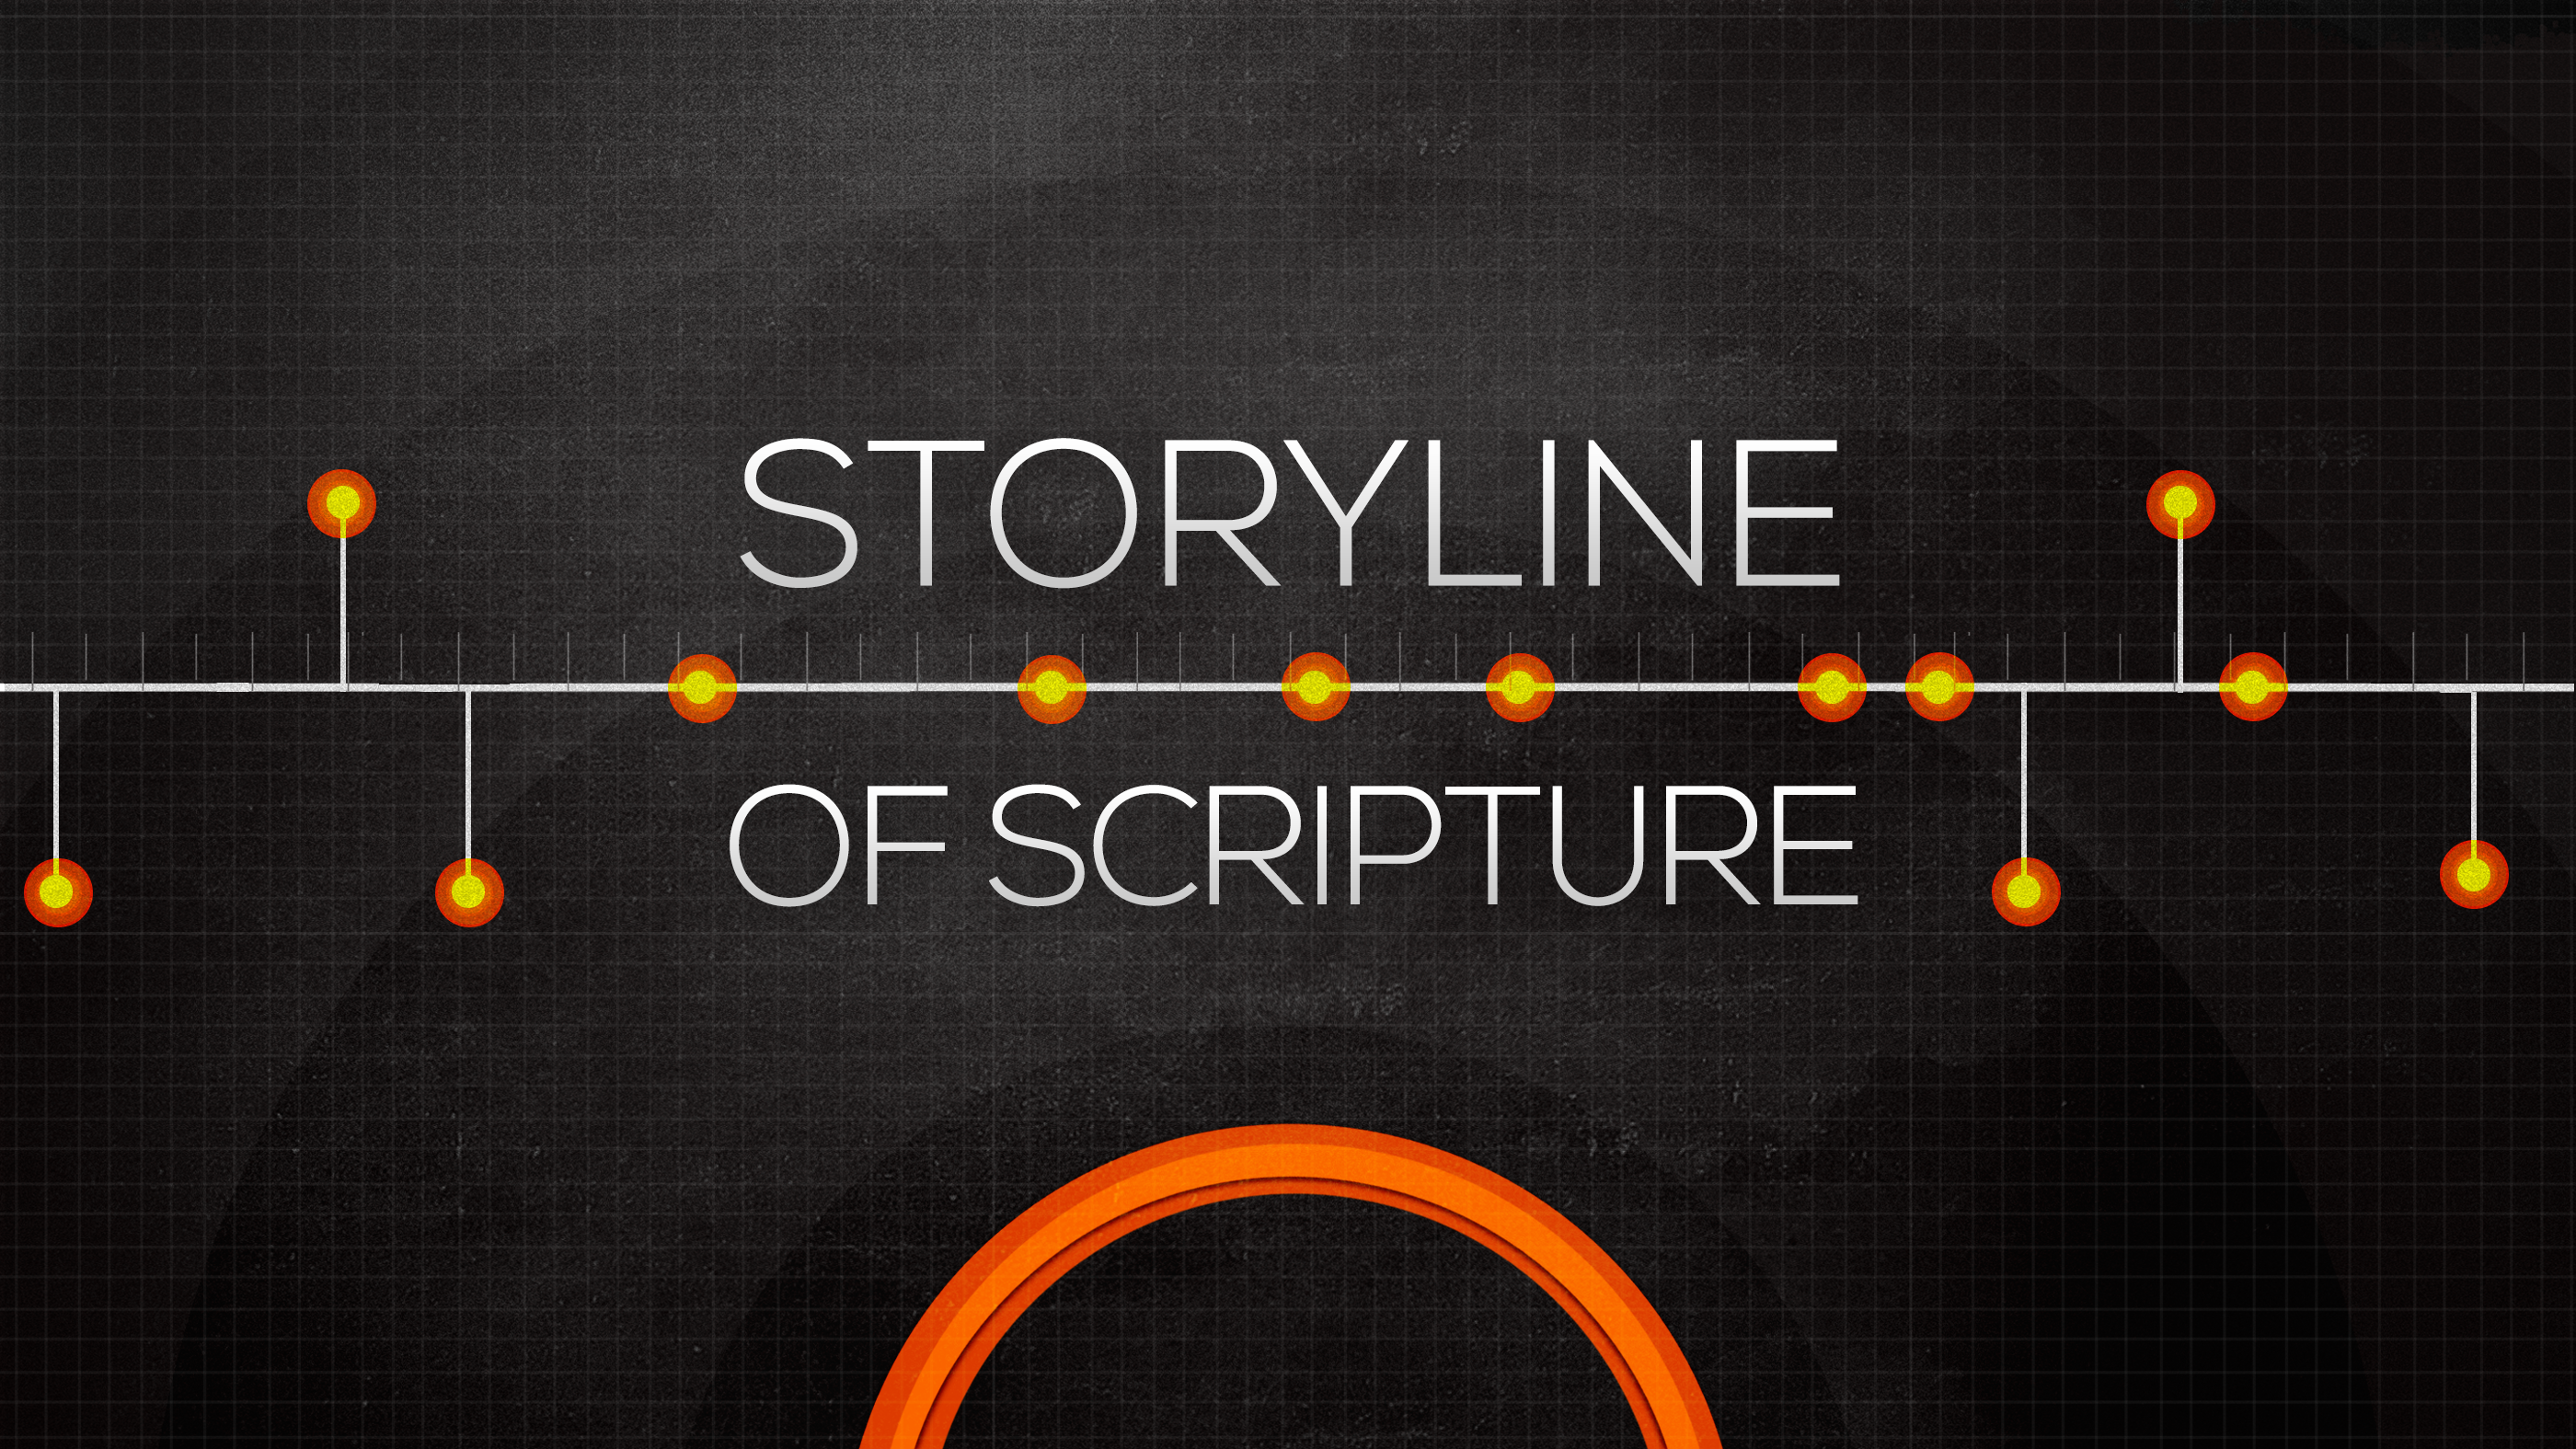 Storyline of Scripture - Temple